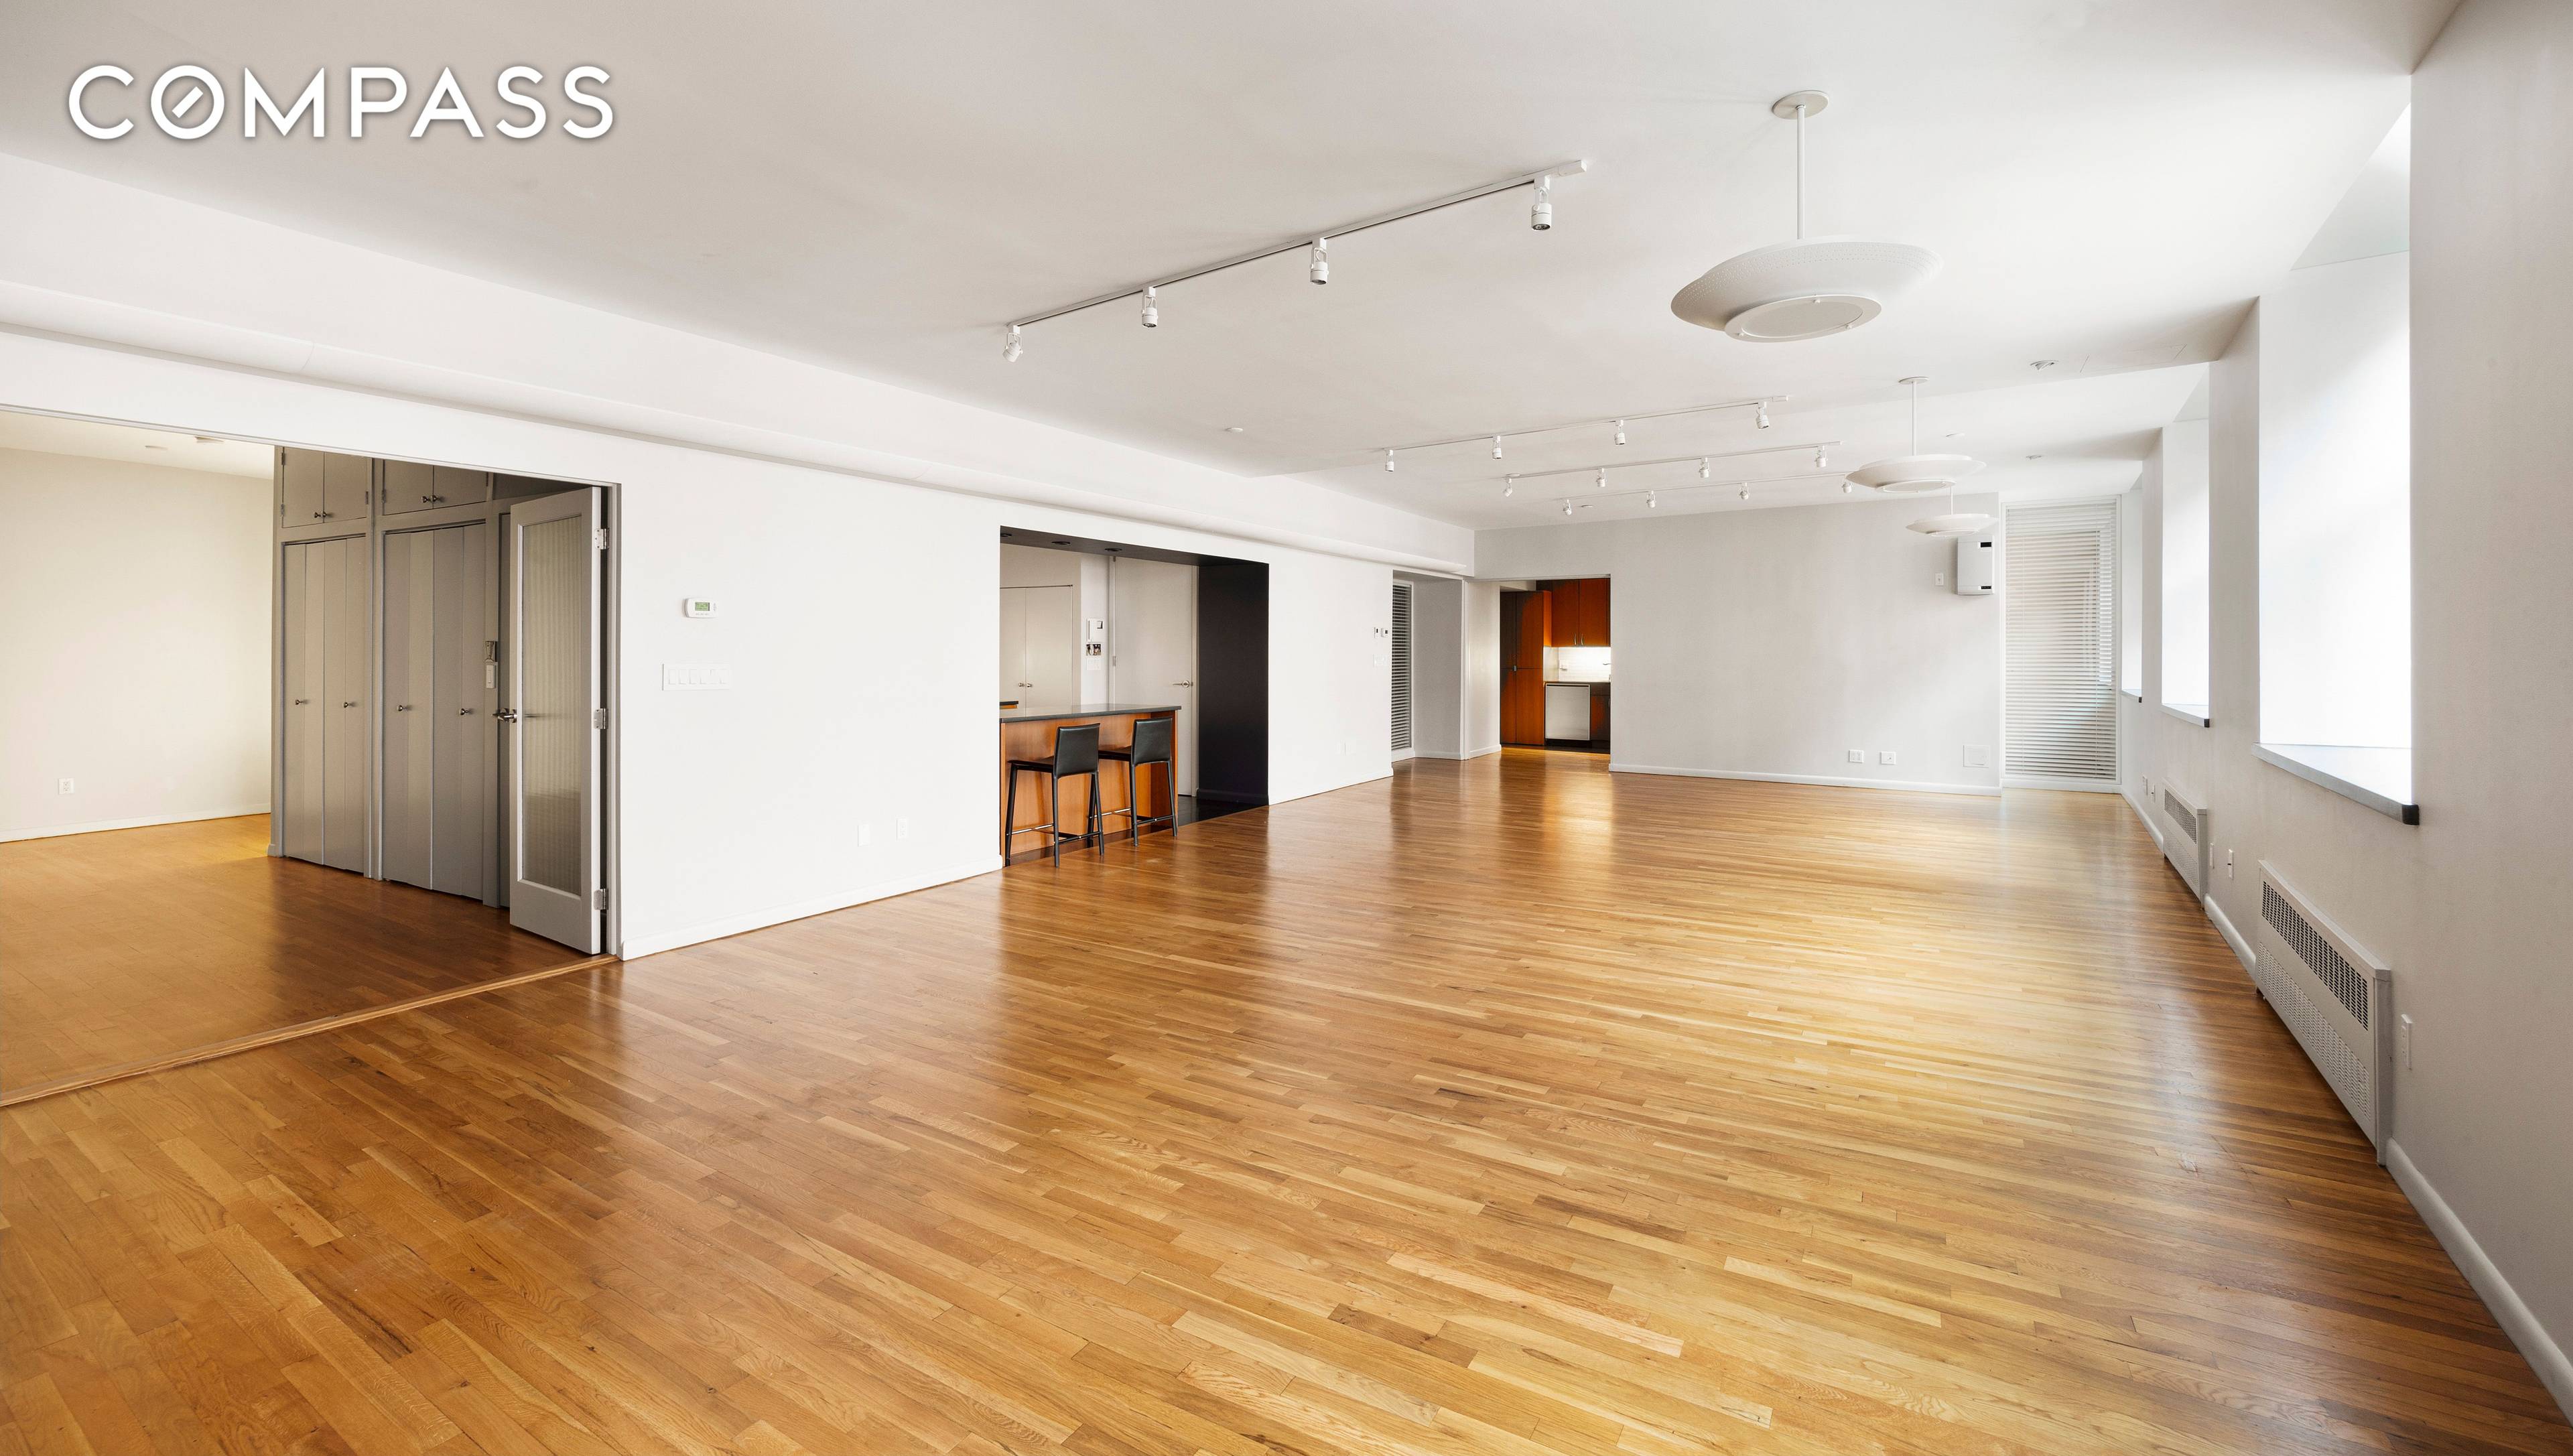 Ideally situated at the corner of Hudson and Leonard Streets in the heart of TriBeCa, this bright and airy 3 bed, 2 bath loft offers a spacious layout, exposed brick, ...